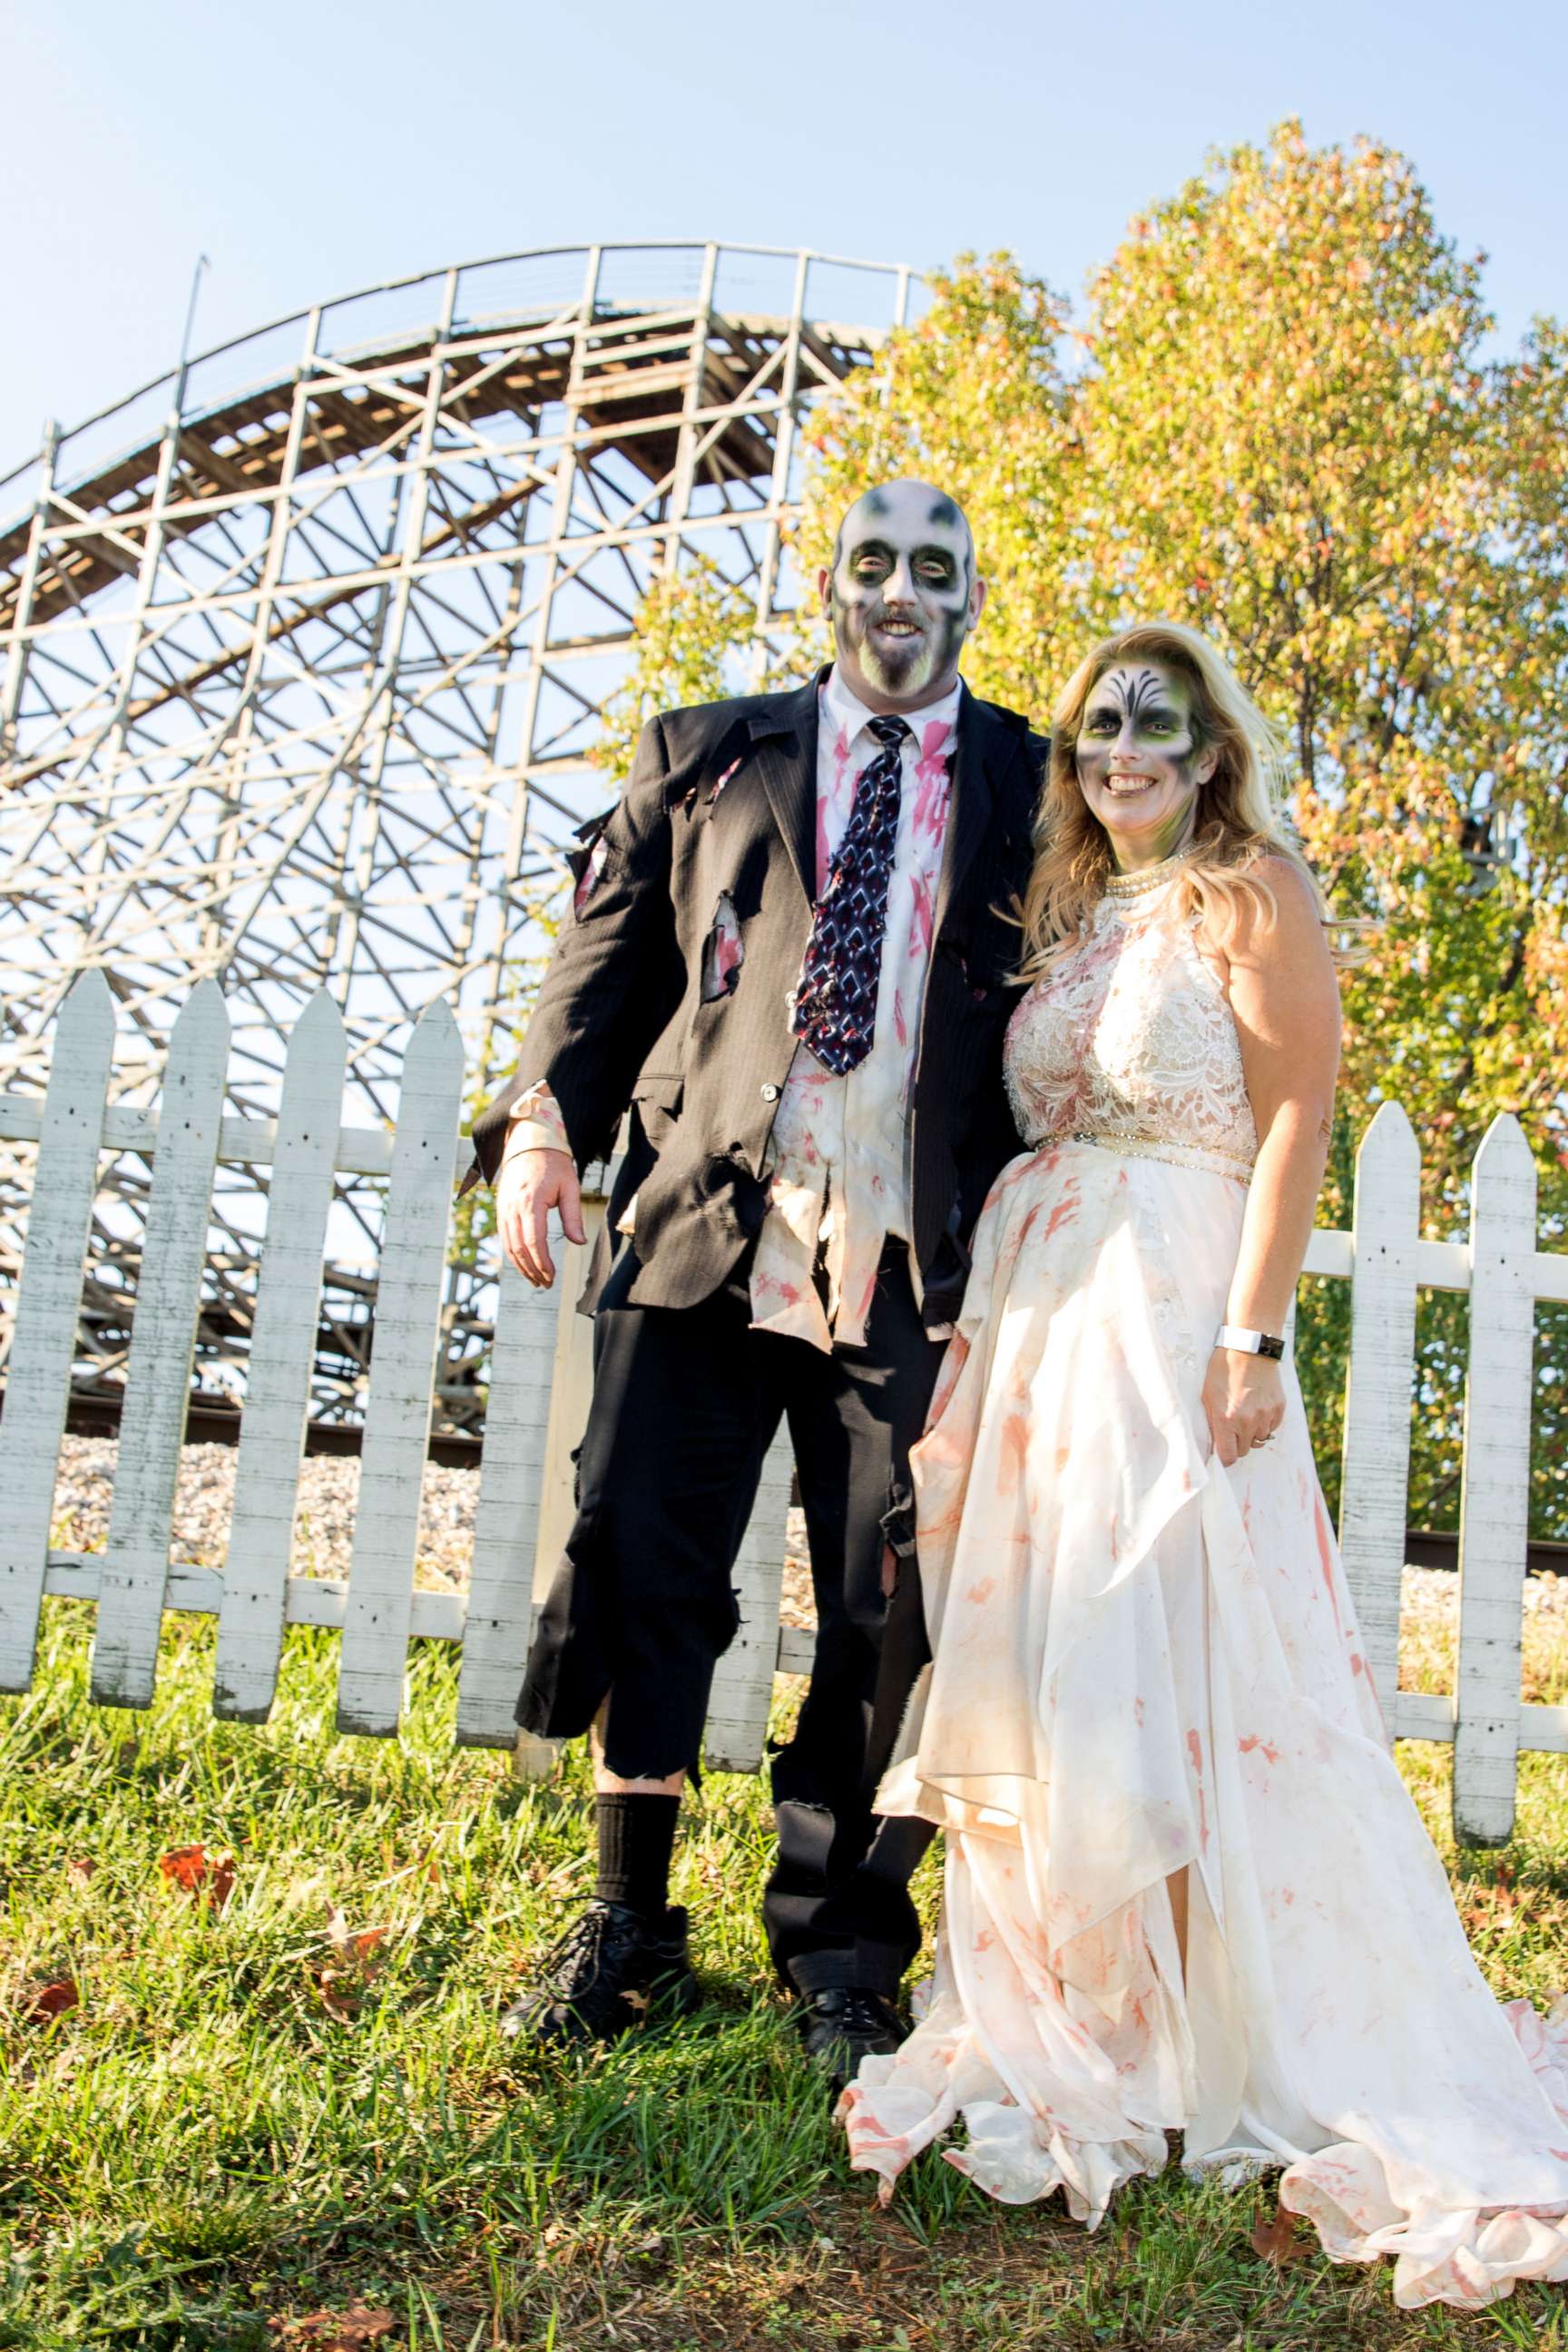 PHOTO: Christina and Michael Pasley of Beecher City, Ill., were married at Fright Fest in 2002 renewed their vows this year.